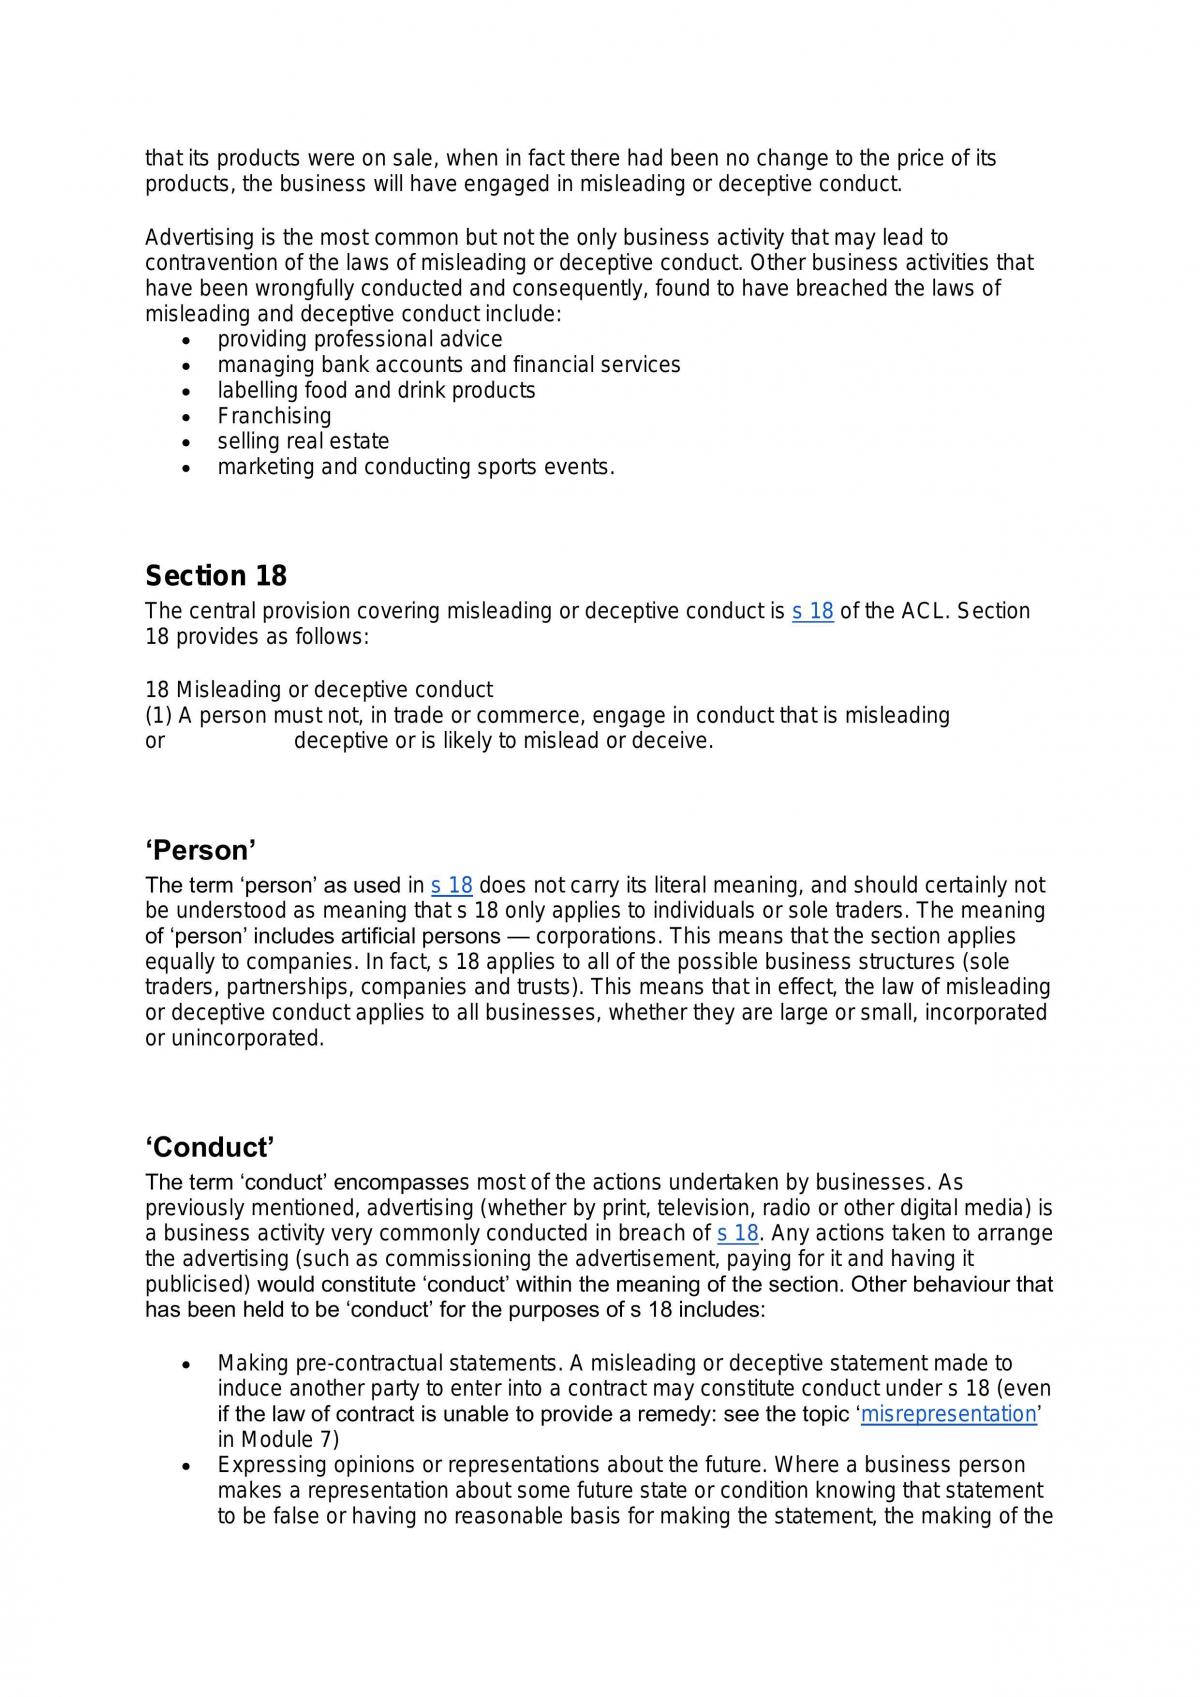 Enterprise Law Summary Notes - Page 28